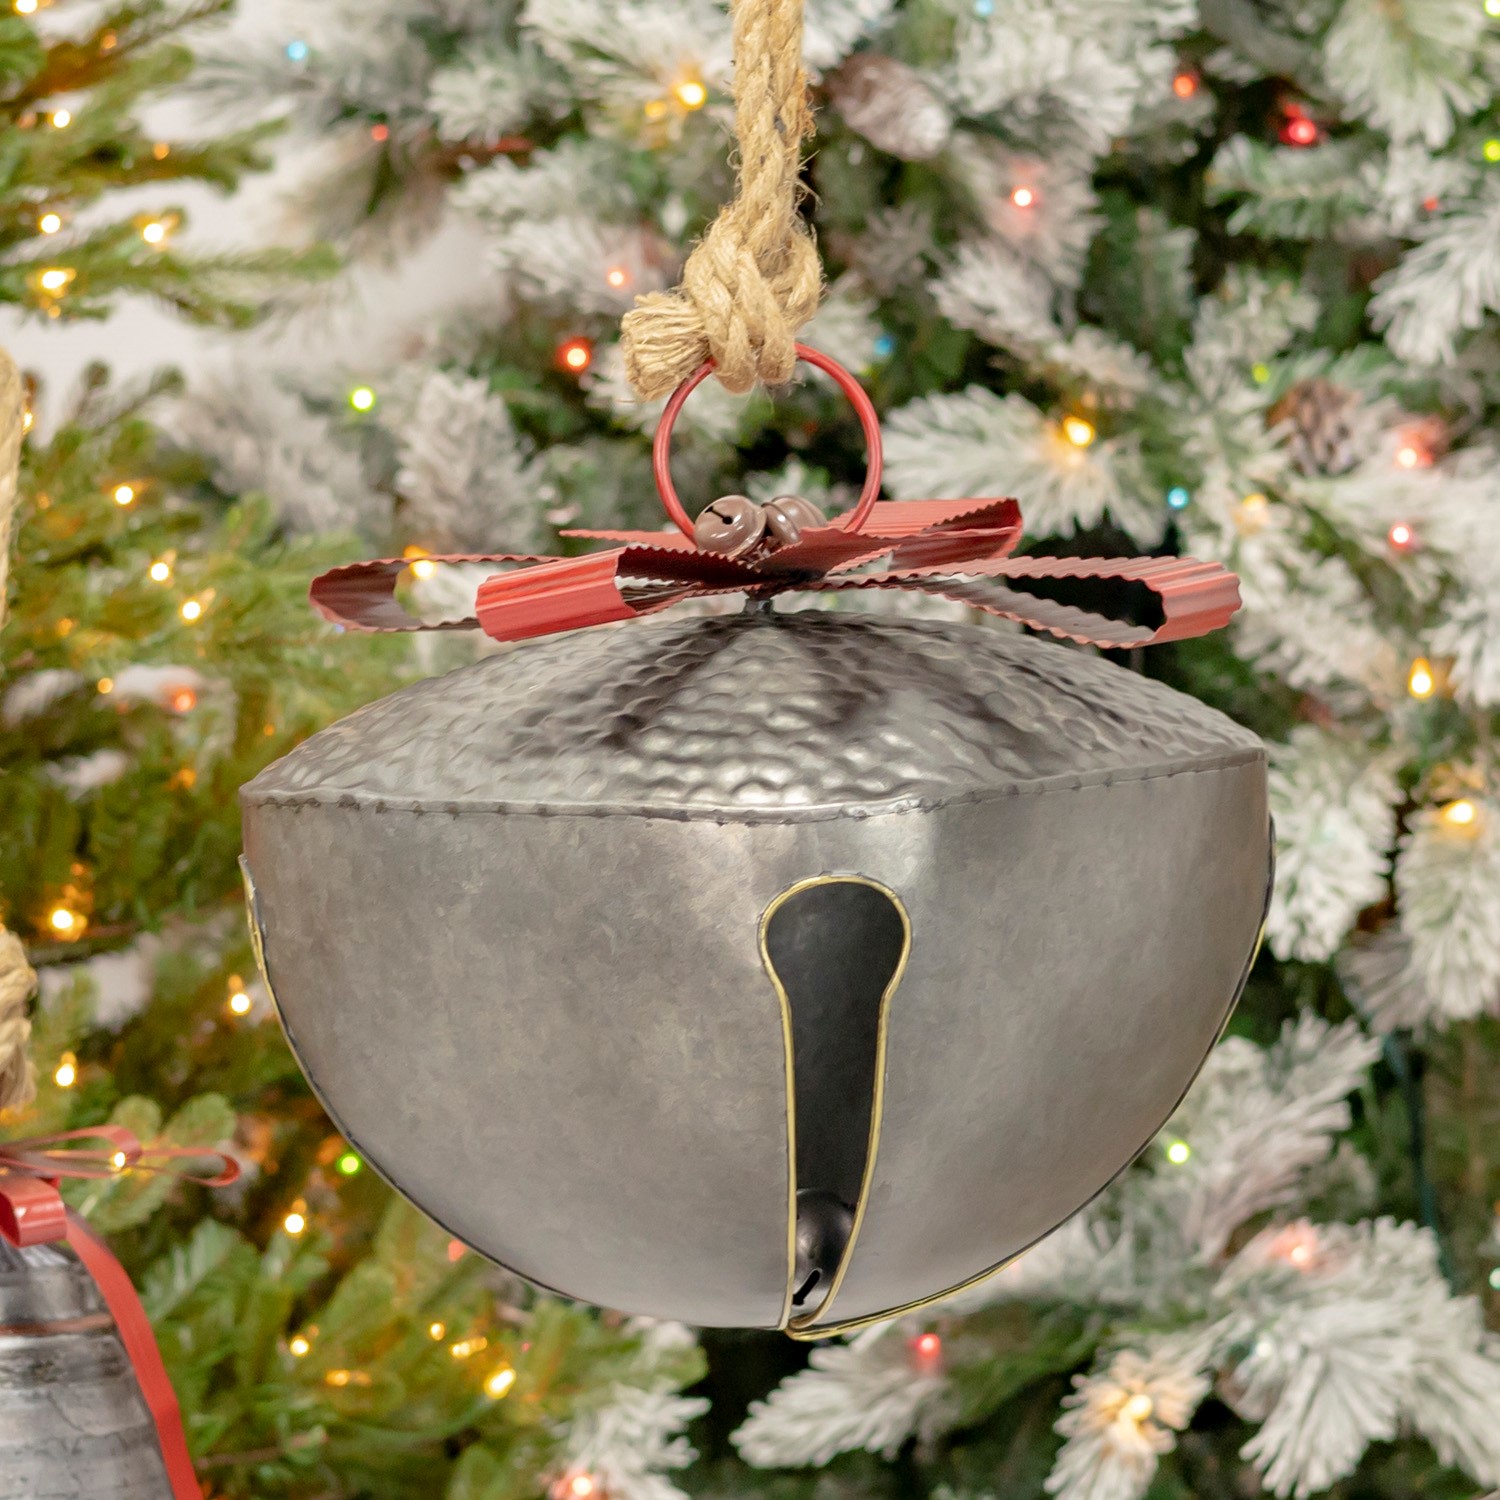 Stunning Large Metal Jingle Bells for Decor and Souvenirs